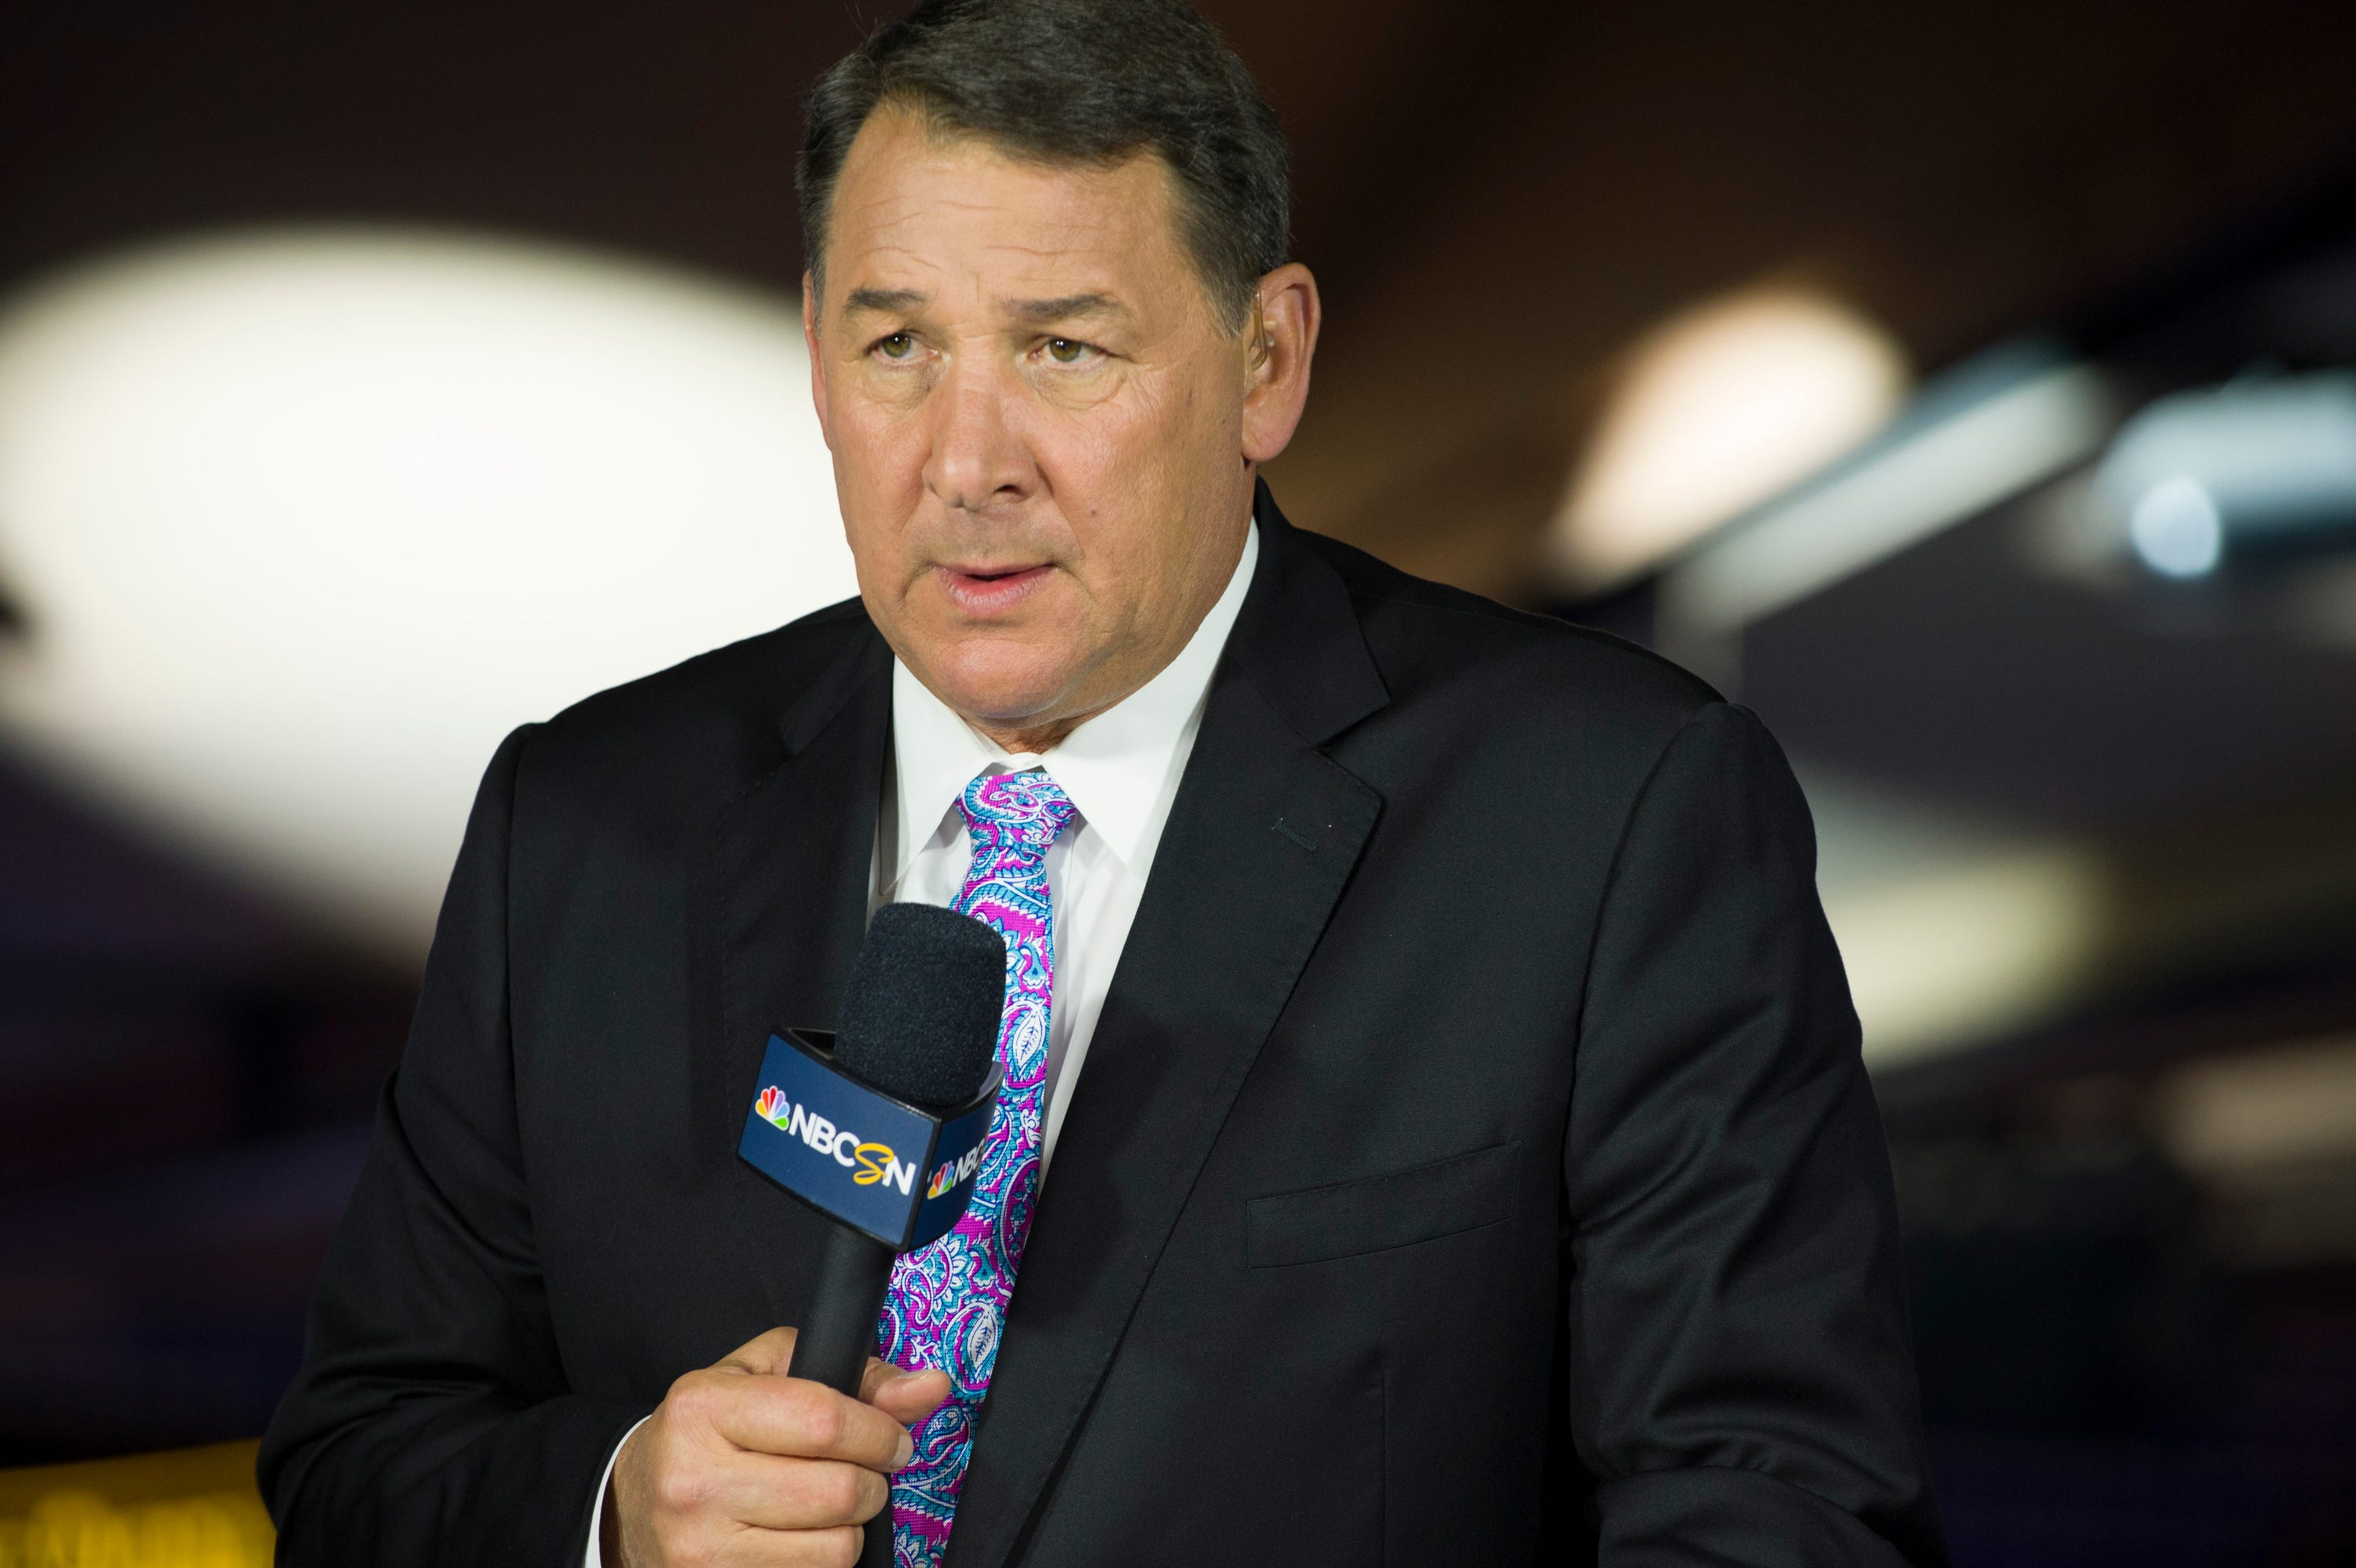 NHL analyst Mike Milbury will no longer be with NBC Sports as season gets set to start